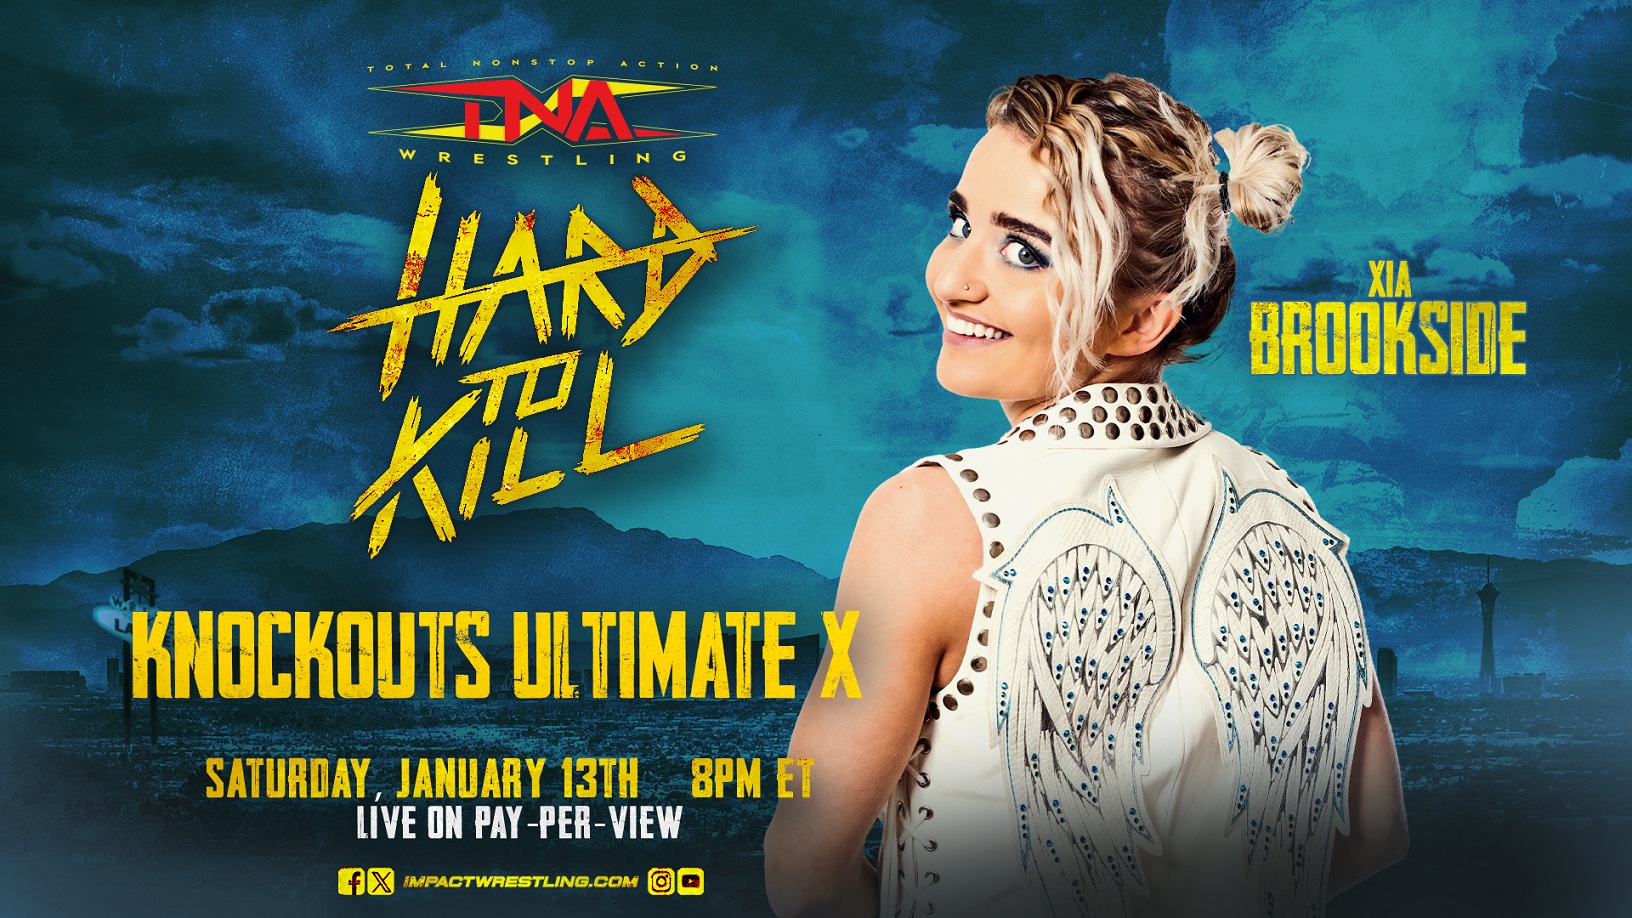 Xia Brookside Makes Her TNA Debut in Knockouts Ultimate X at Hard To Kill – TNA Wrestling